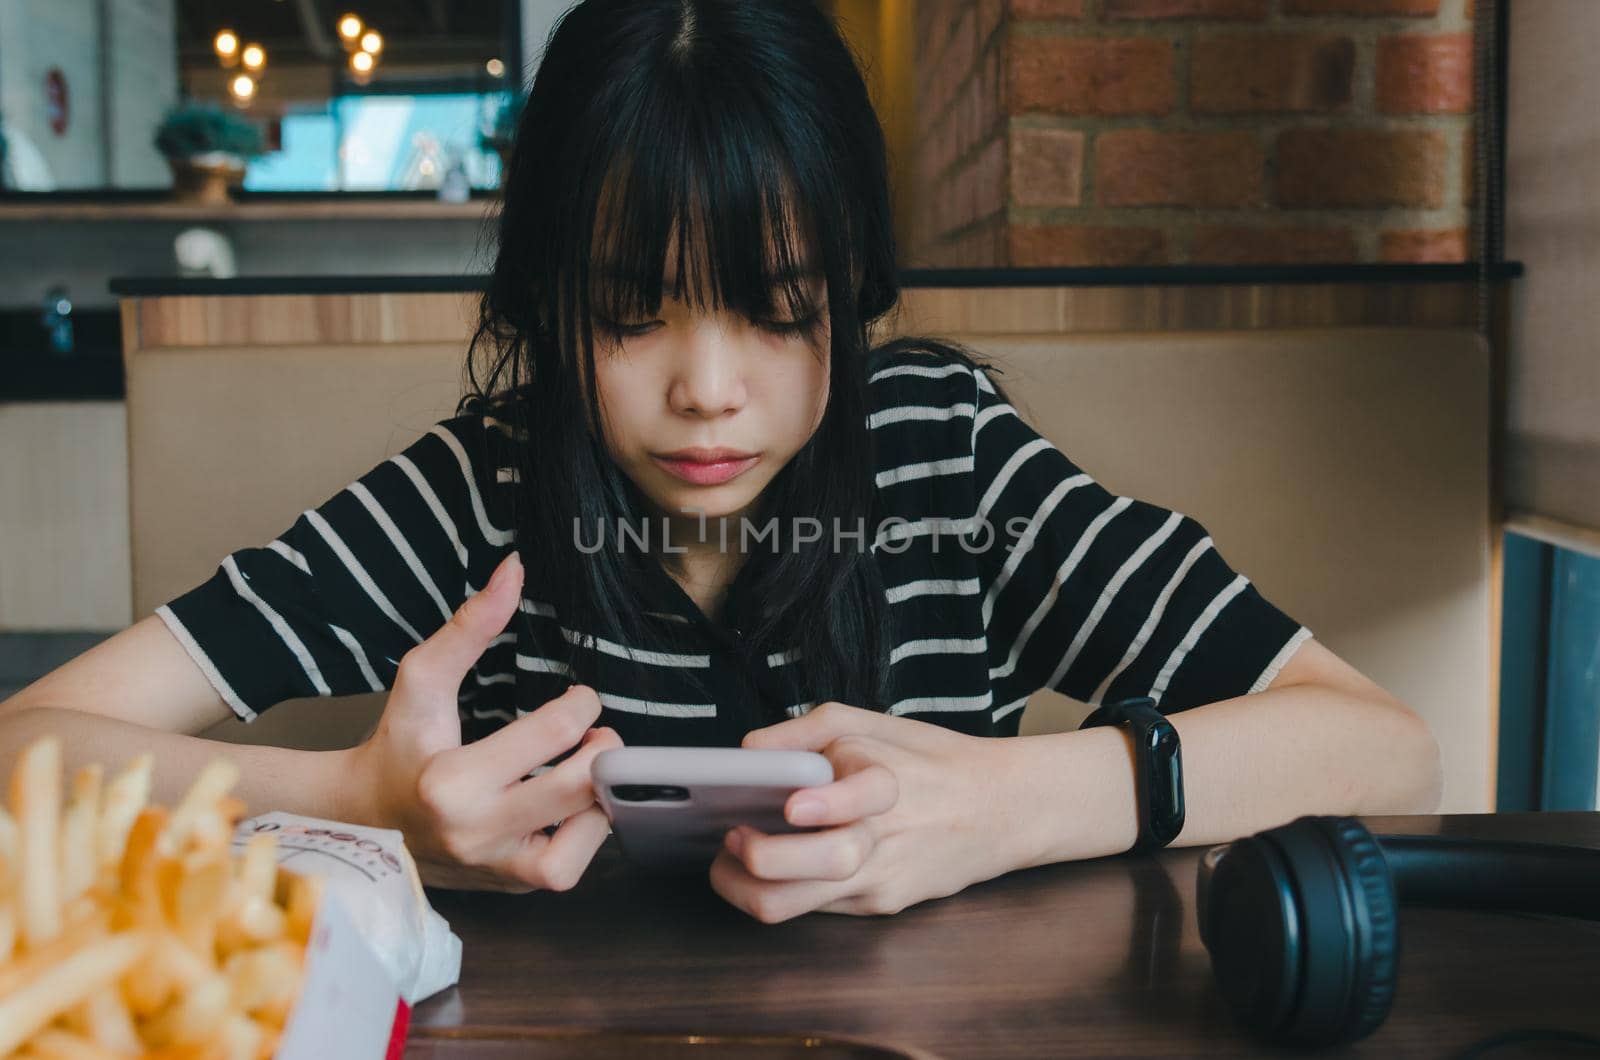 Teenage girl wearing headphones and holding a cell phone smartphone social media relaxing on the sofa. by aoo3771